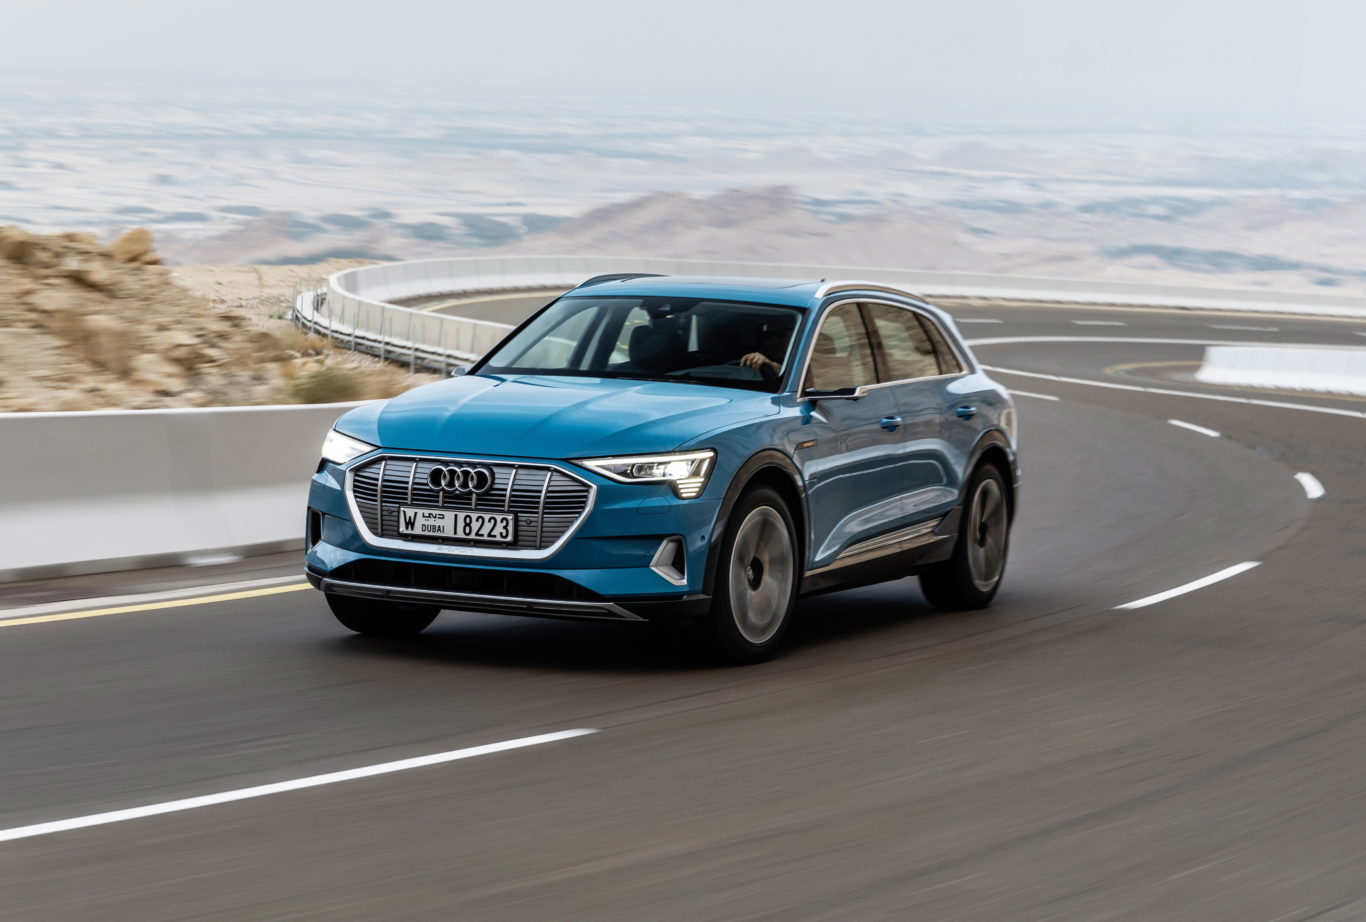 Audi's e-tron is due to hit the market shortly